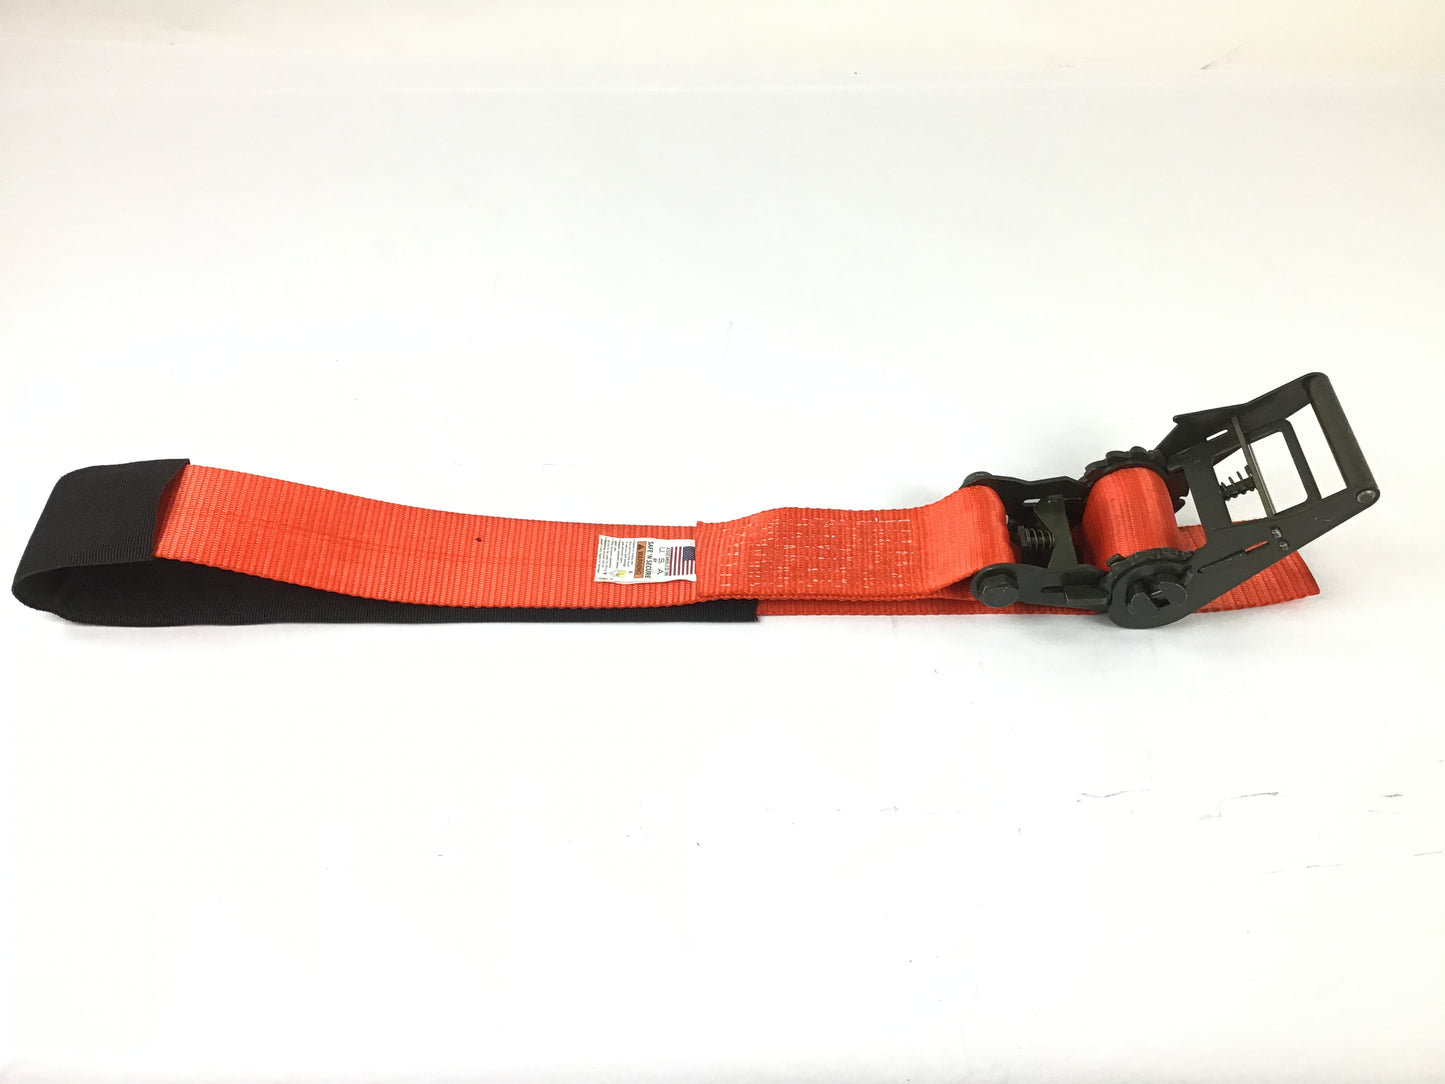 2 Pack Underlift Tow Tie Down Straps with Ratchet handles | FREE SHIPPING!